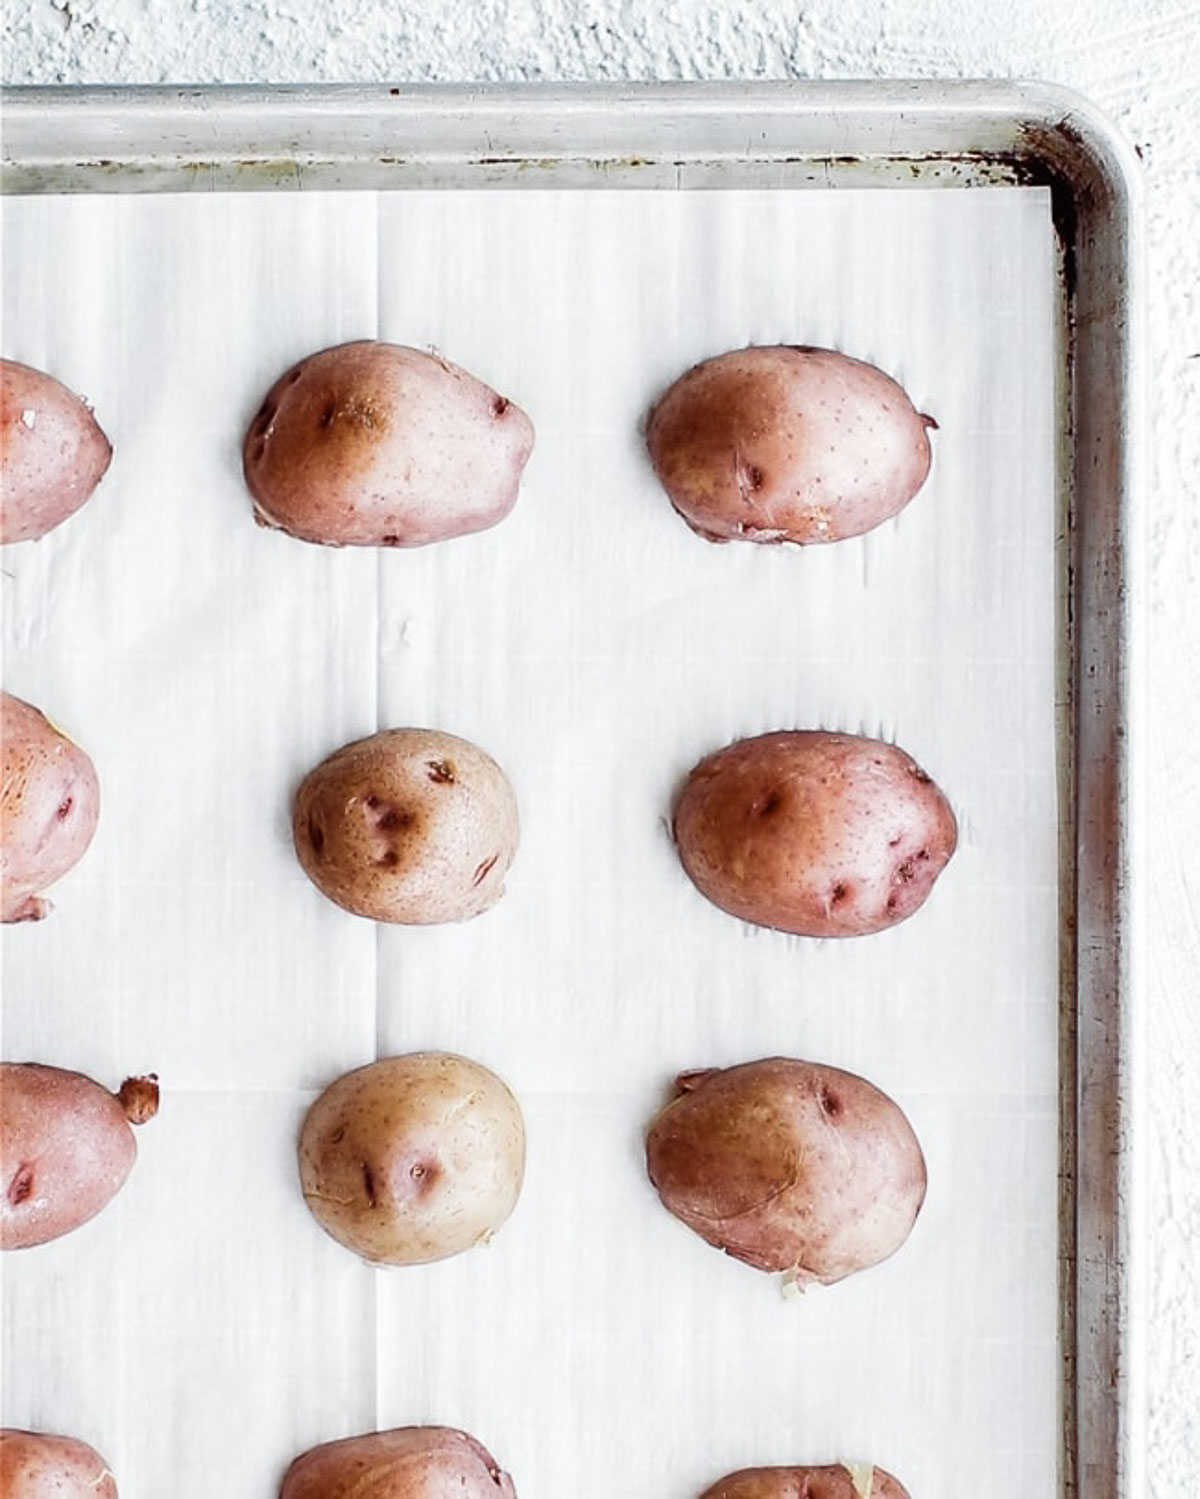 Halved potatoes face down on a tray.